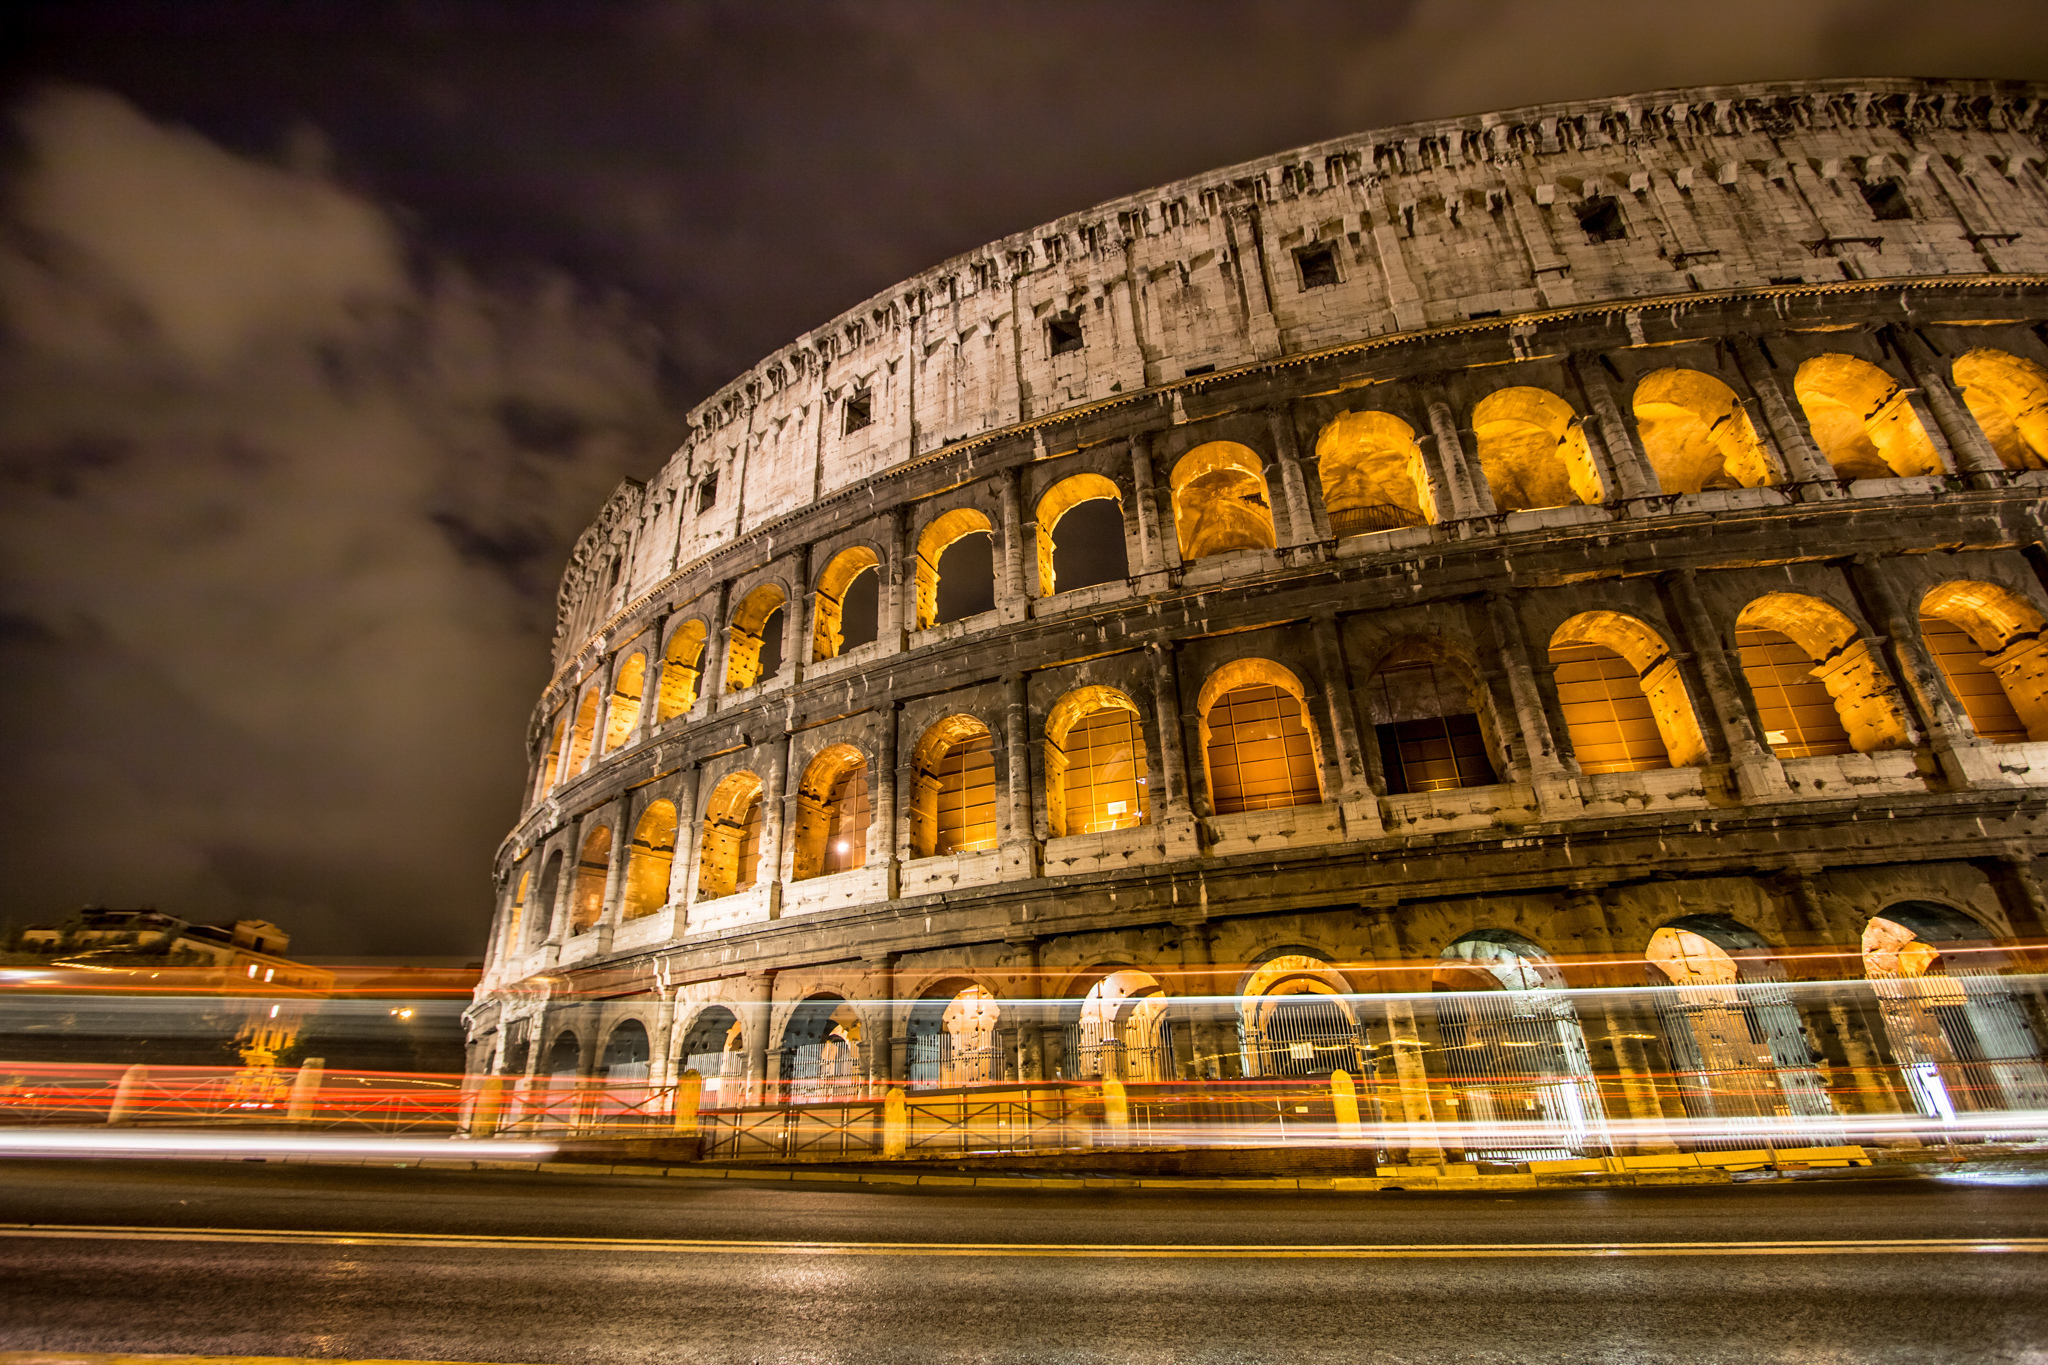 Colosseum Italy Light Night Rome Time Lapse 2048x1365